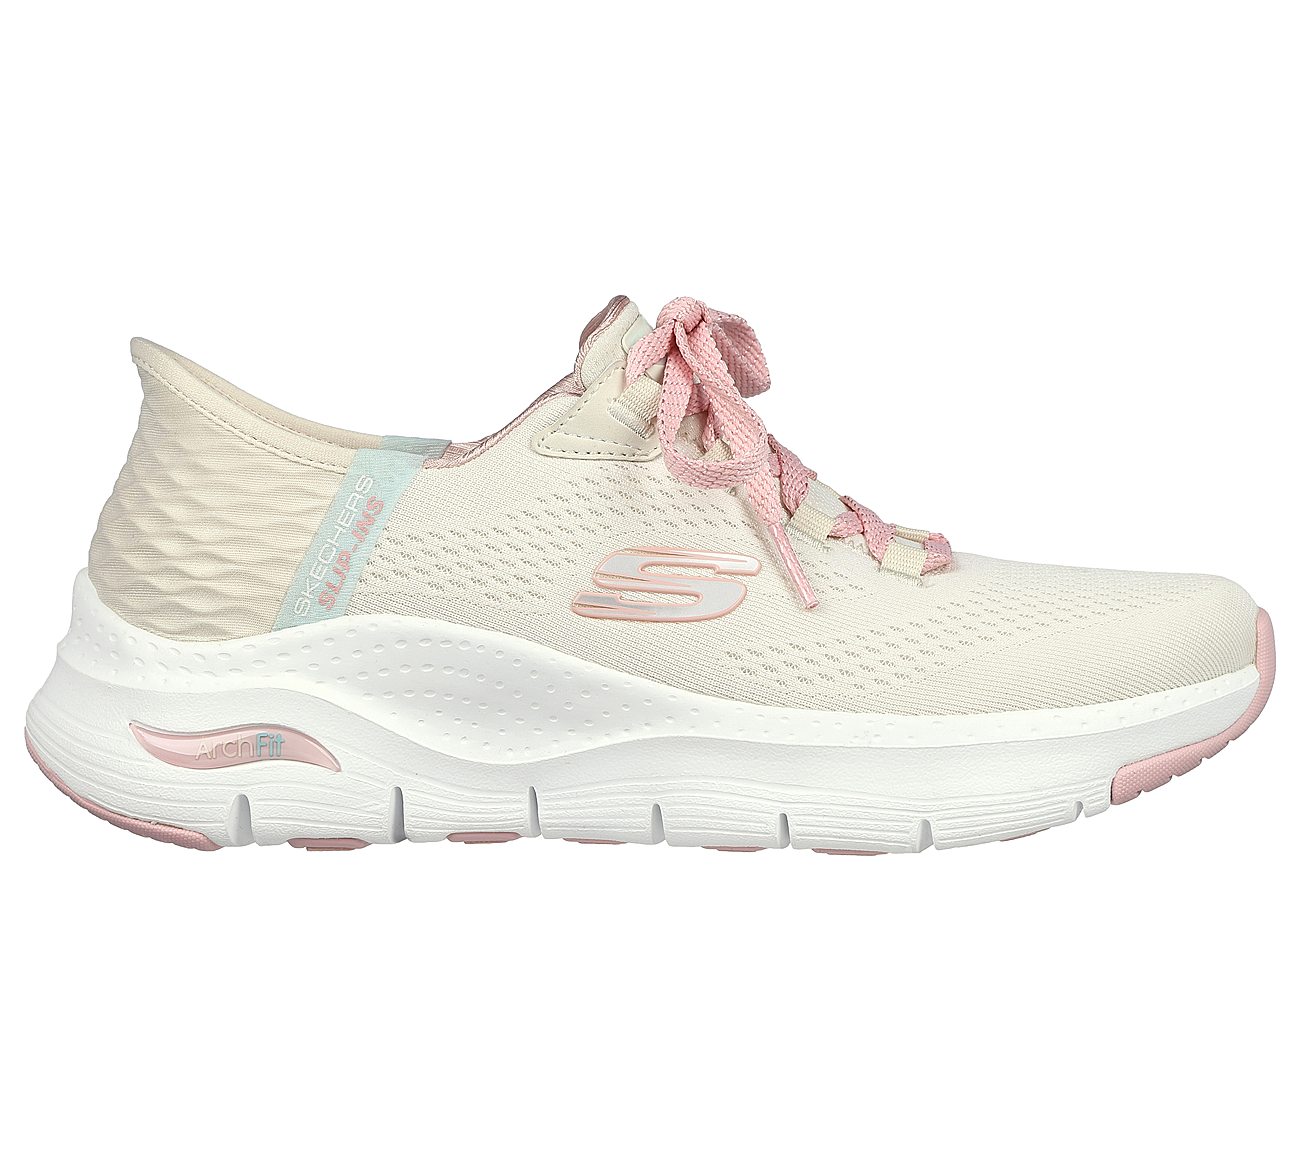 ARCH FIT, OFF WHITE/PINK Footwear Lateral View